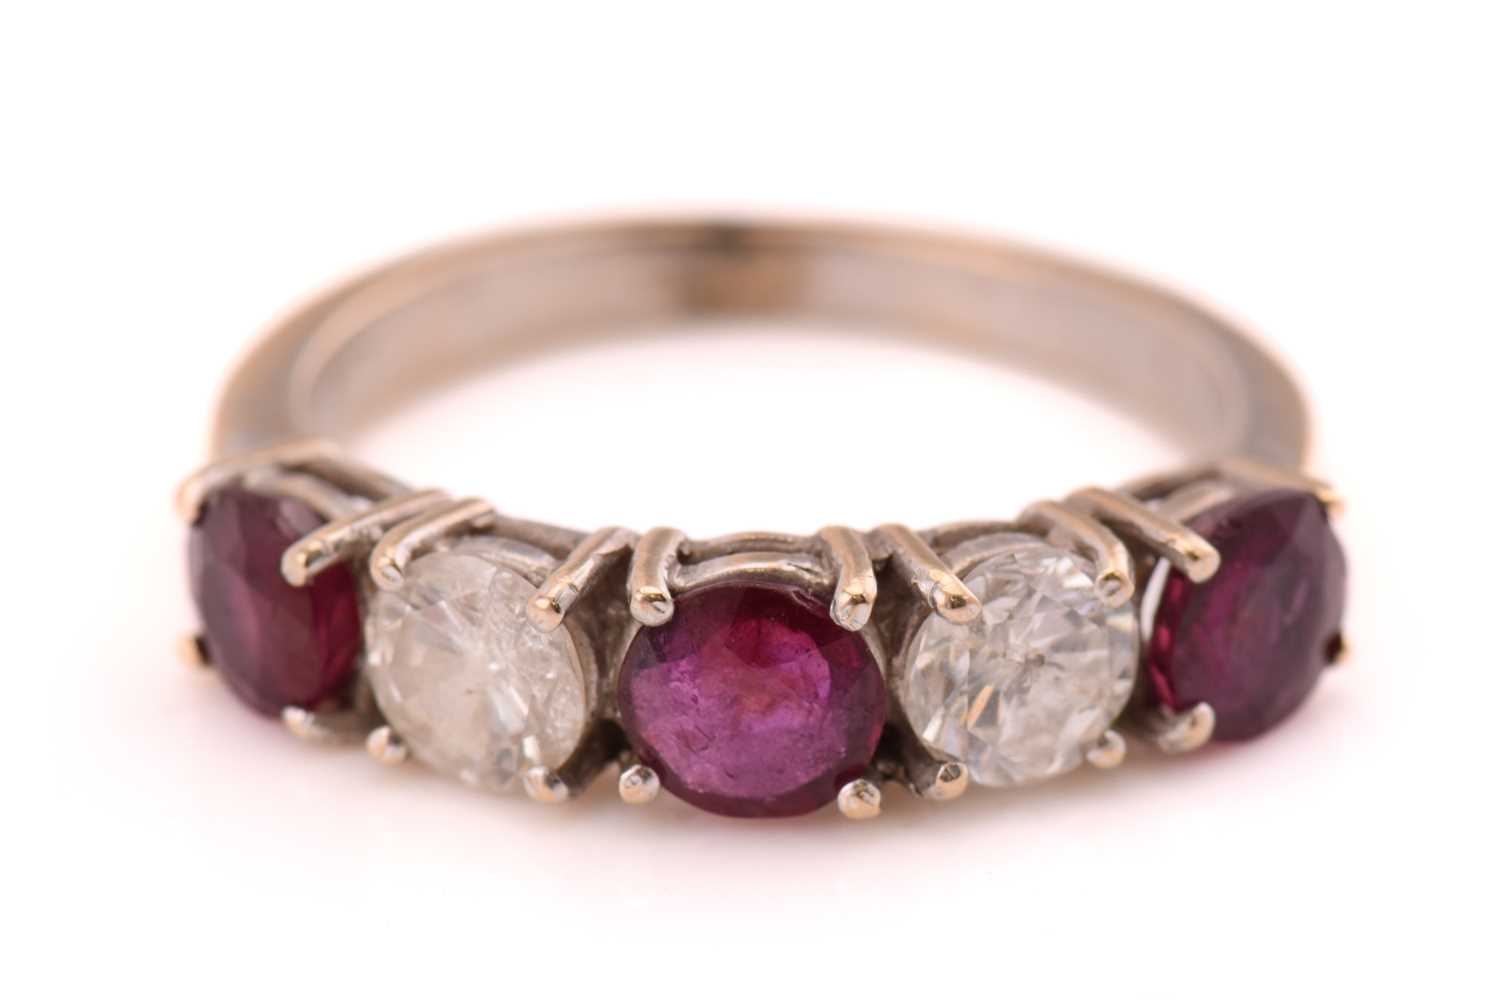 A ruby and diamond five-stones ring, consisting of two round brilliant diamonds with an estimated